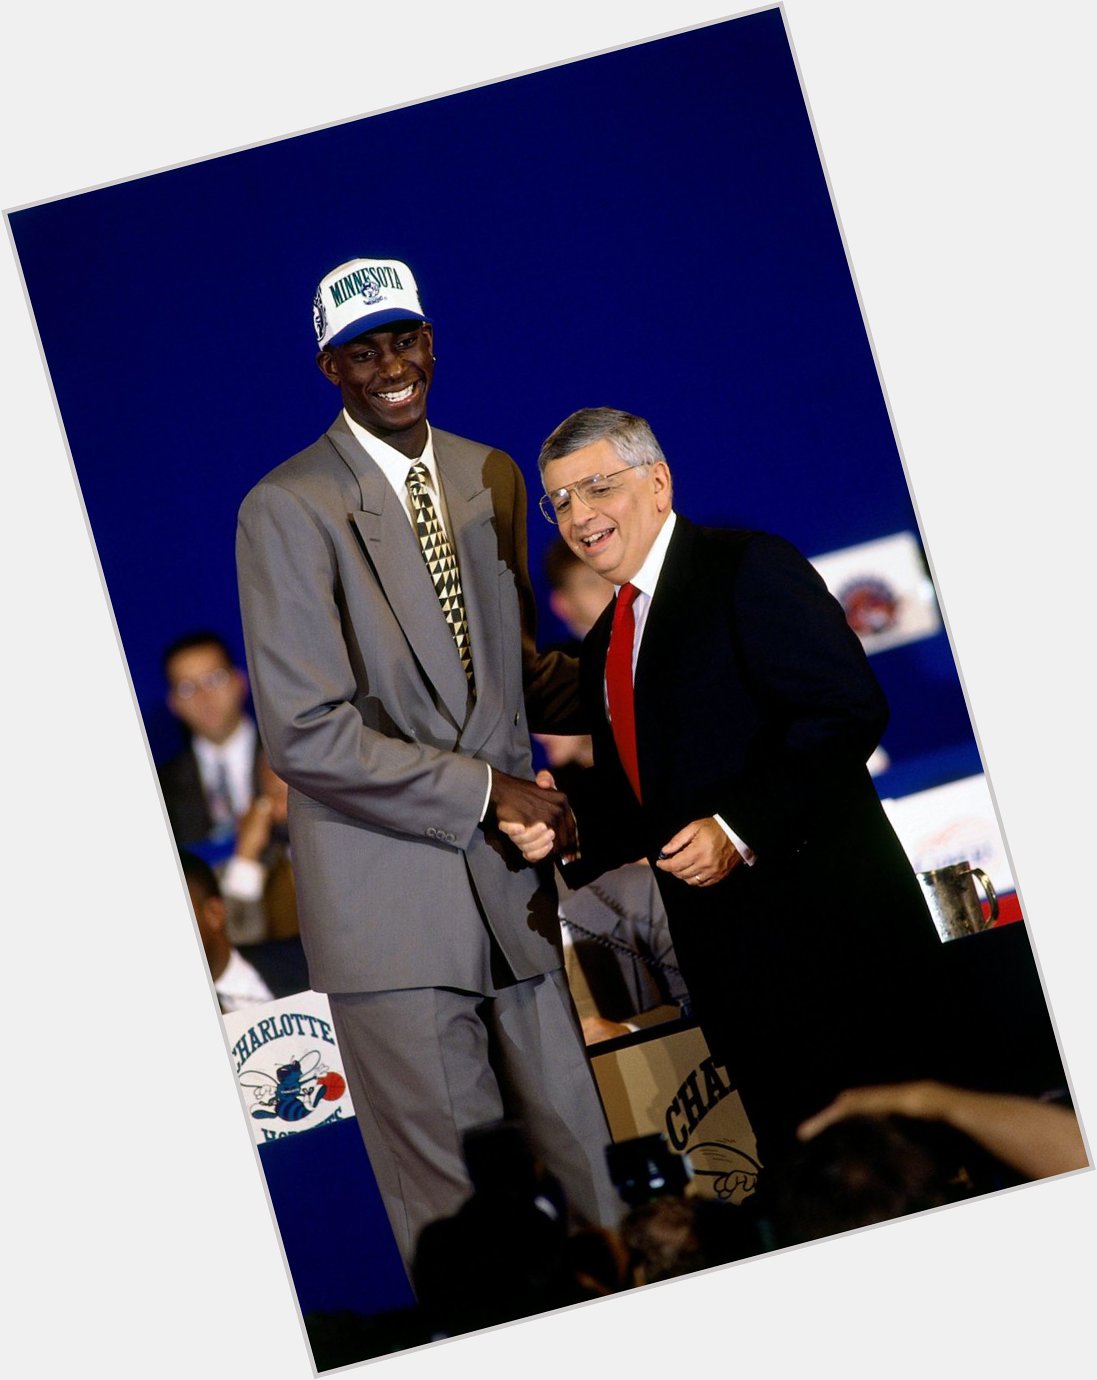 Happy 39th Birthday to the 1st overall pick in the 1995 draft, Kevin Garnett! 